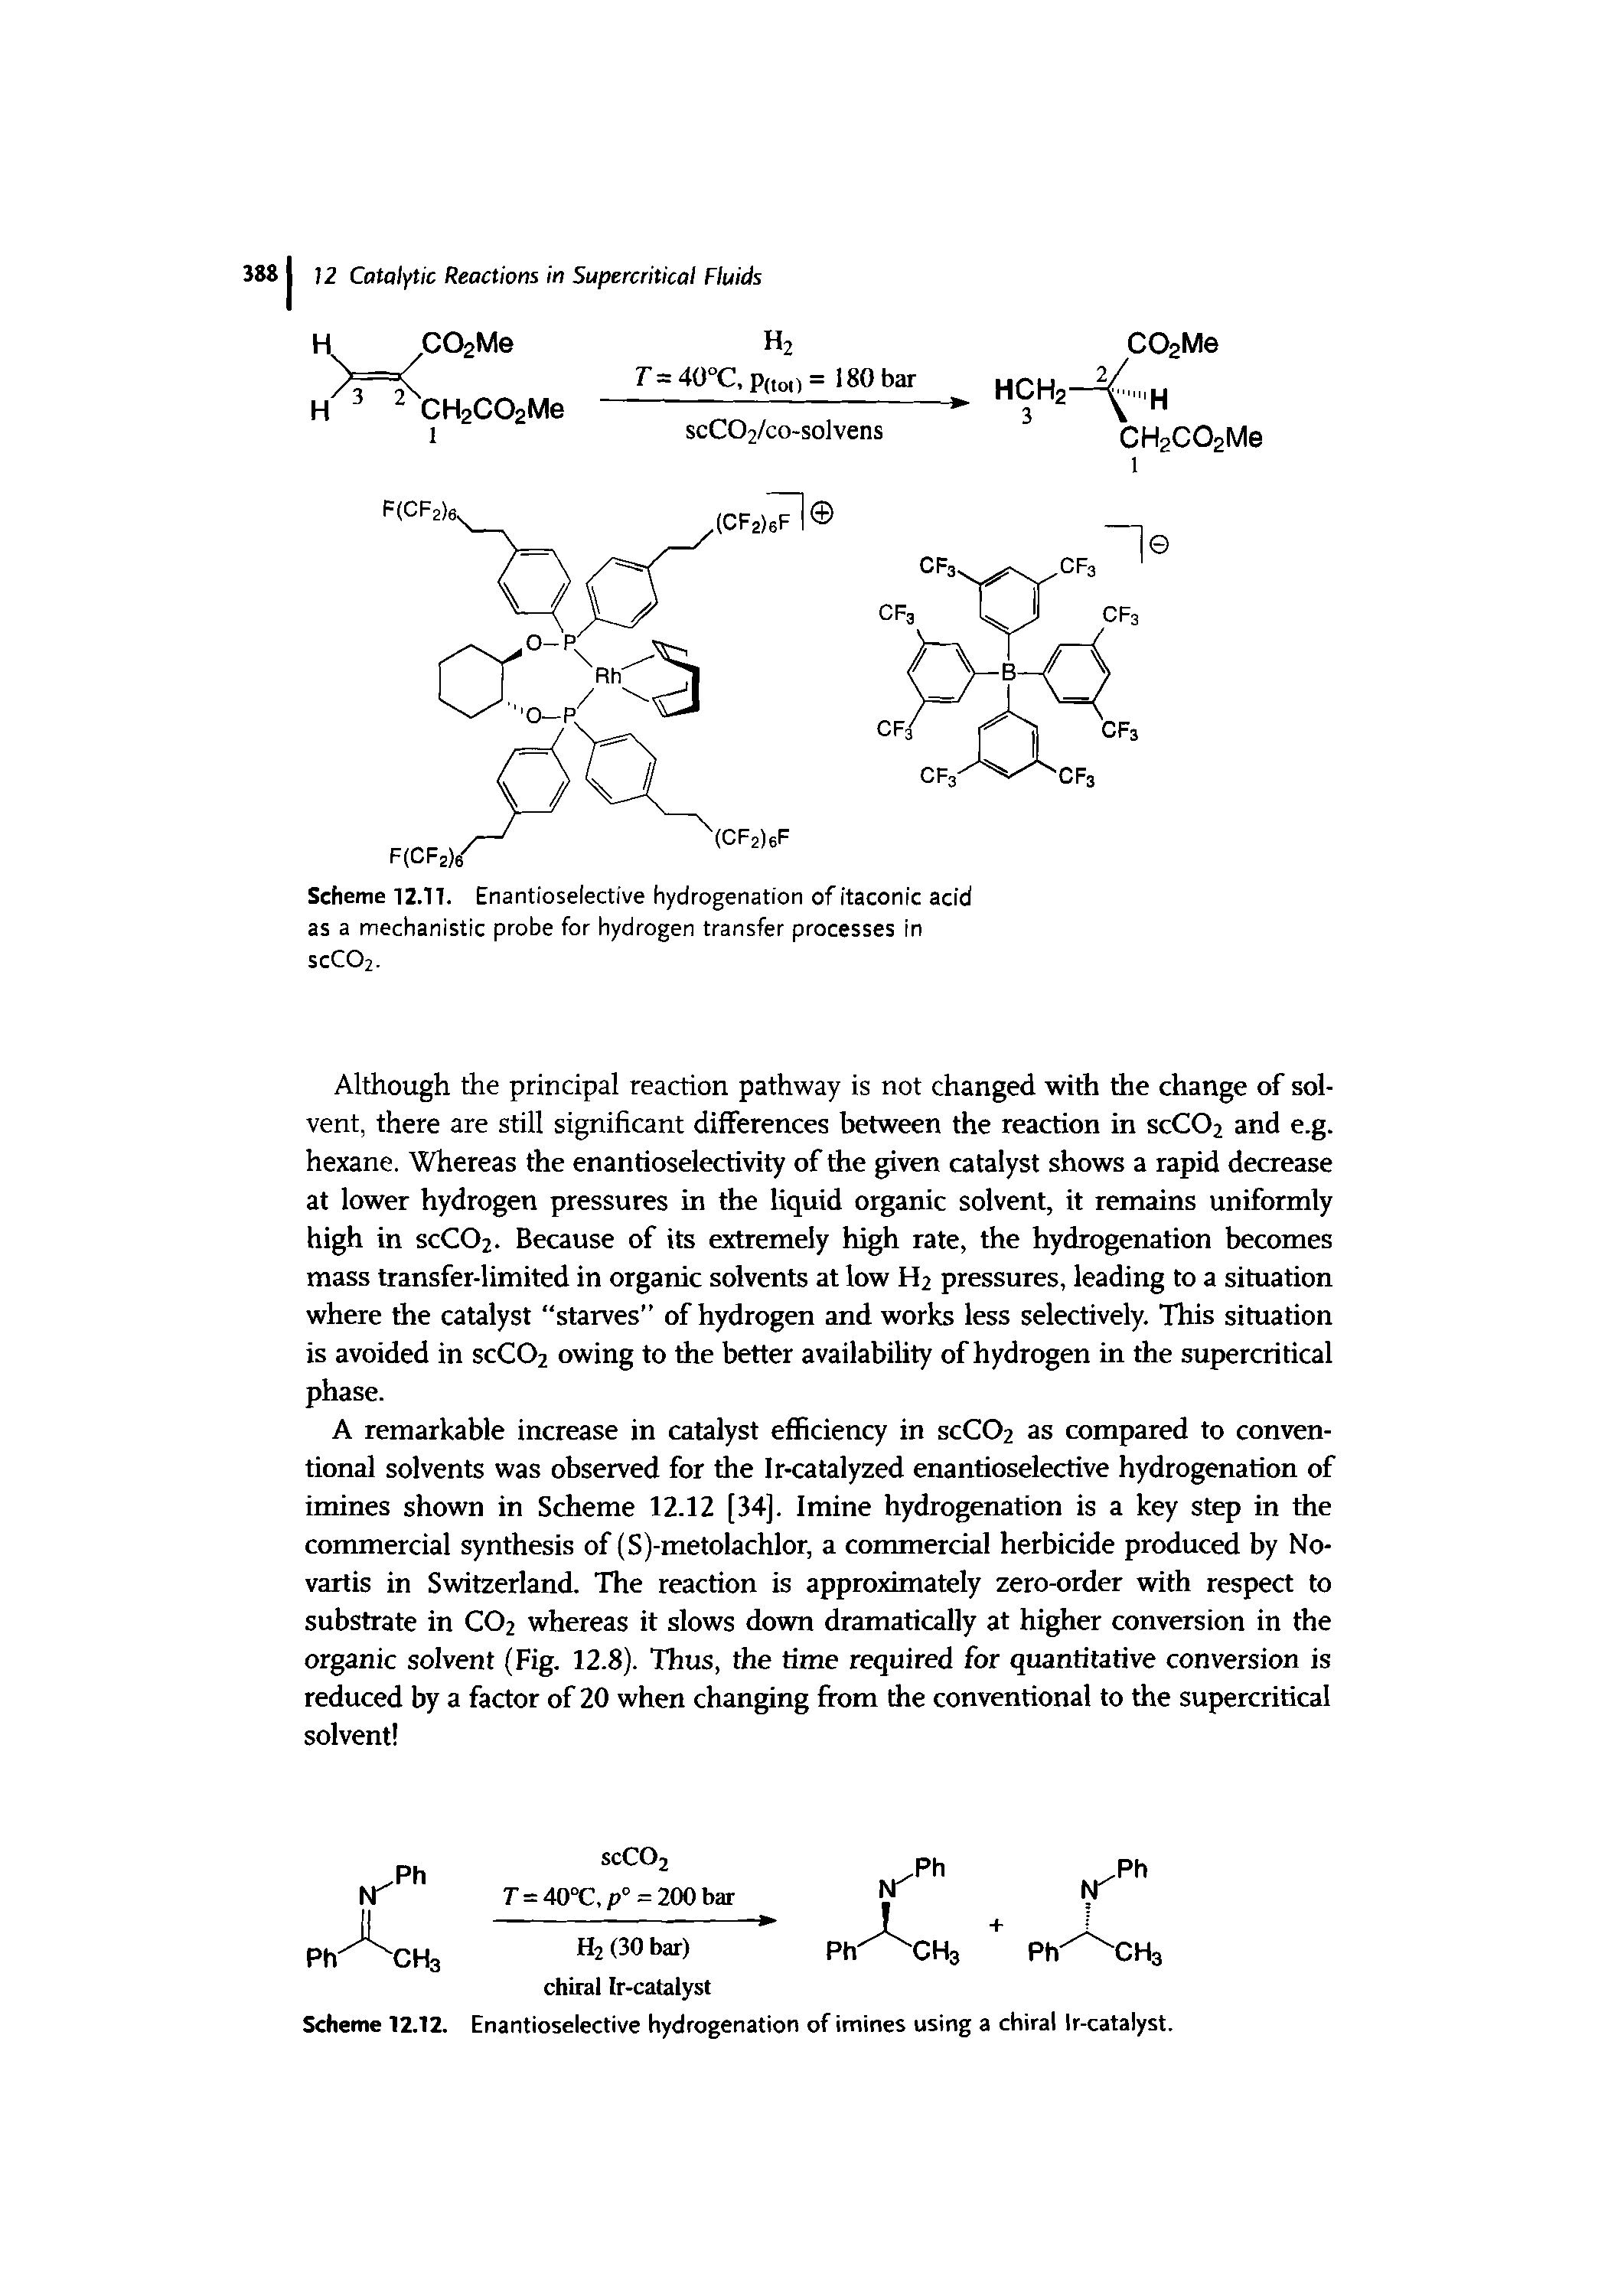 Scheme 12.17. Enantioselective hydrogenation of itaconic acid as a mechanistic probe for hydrogen transfer processes in SCCO2.